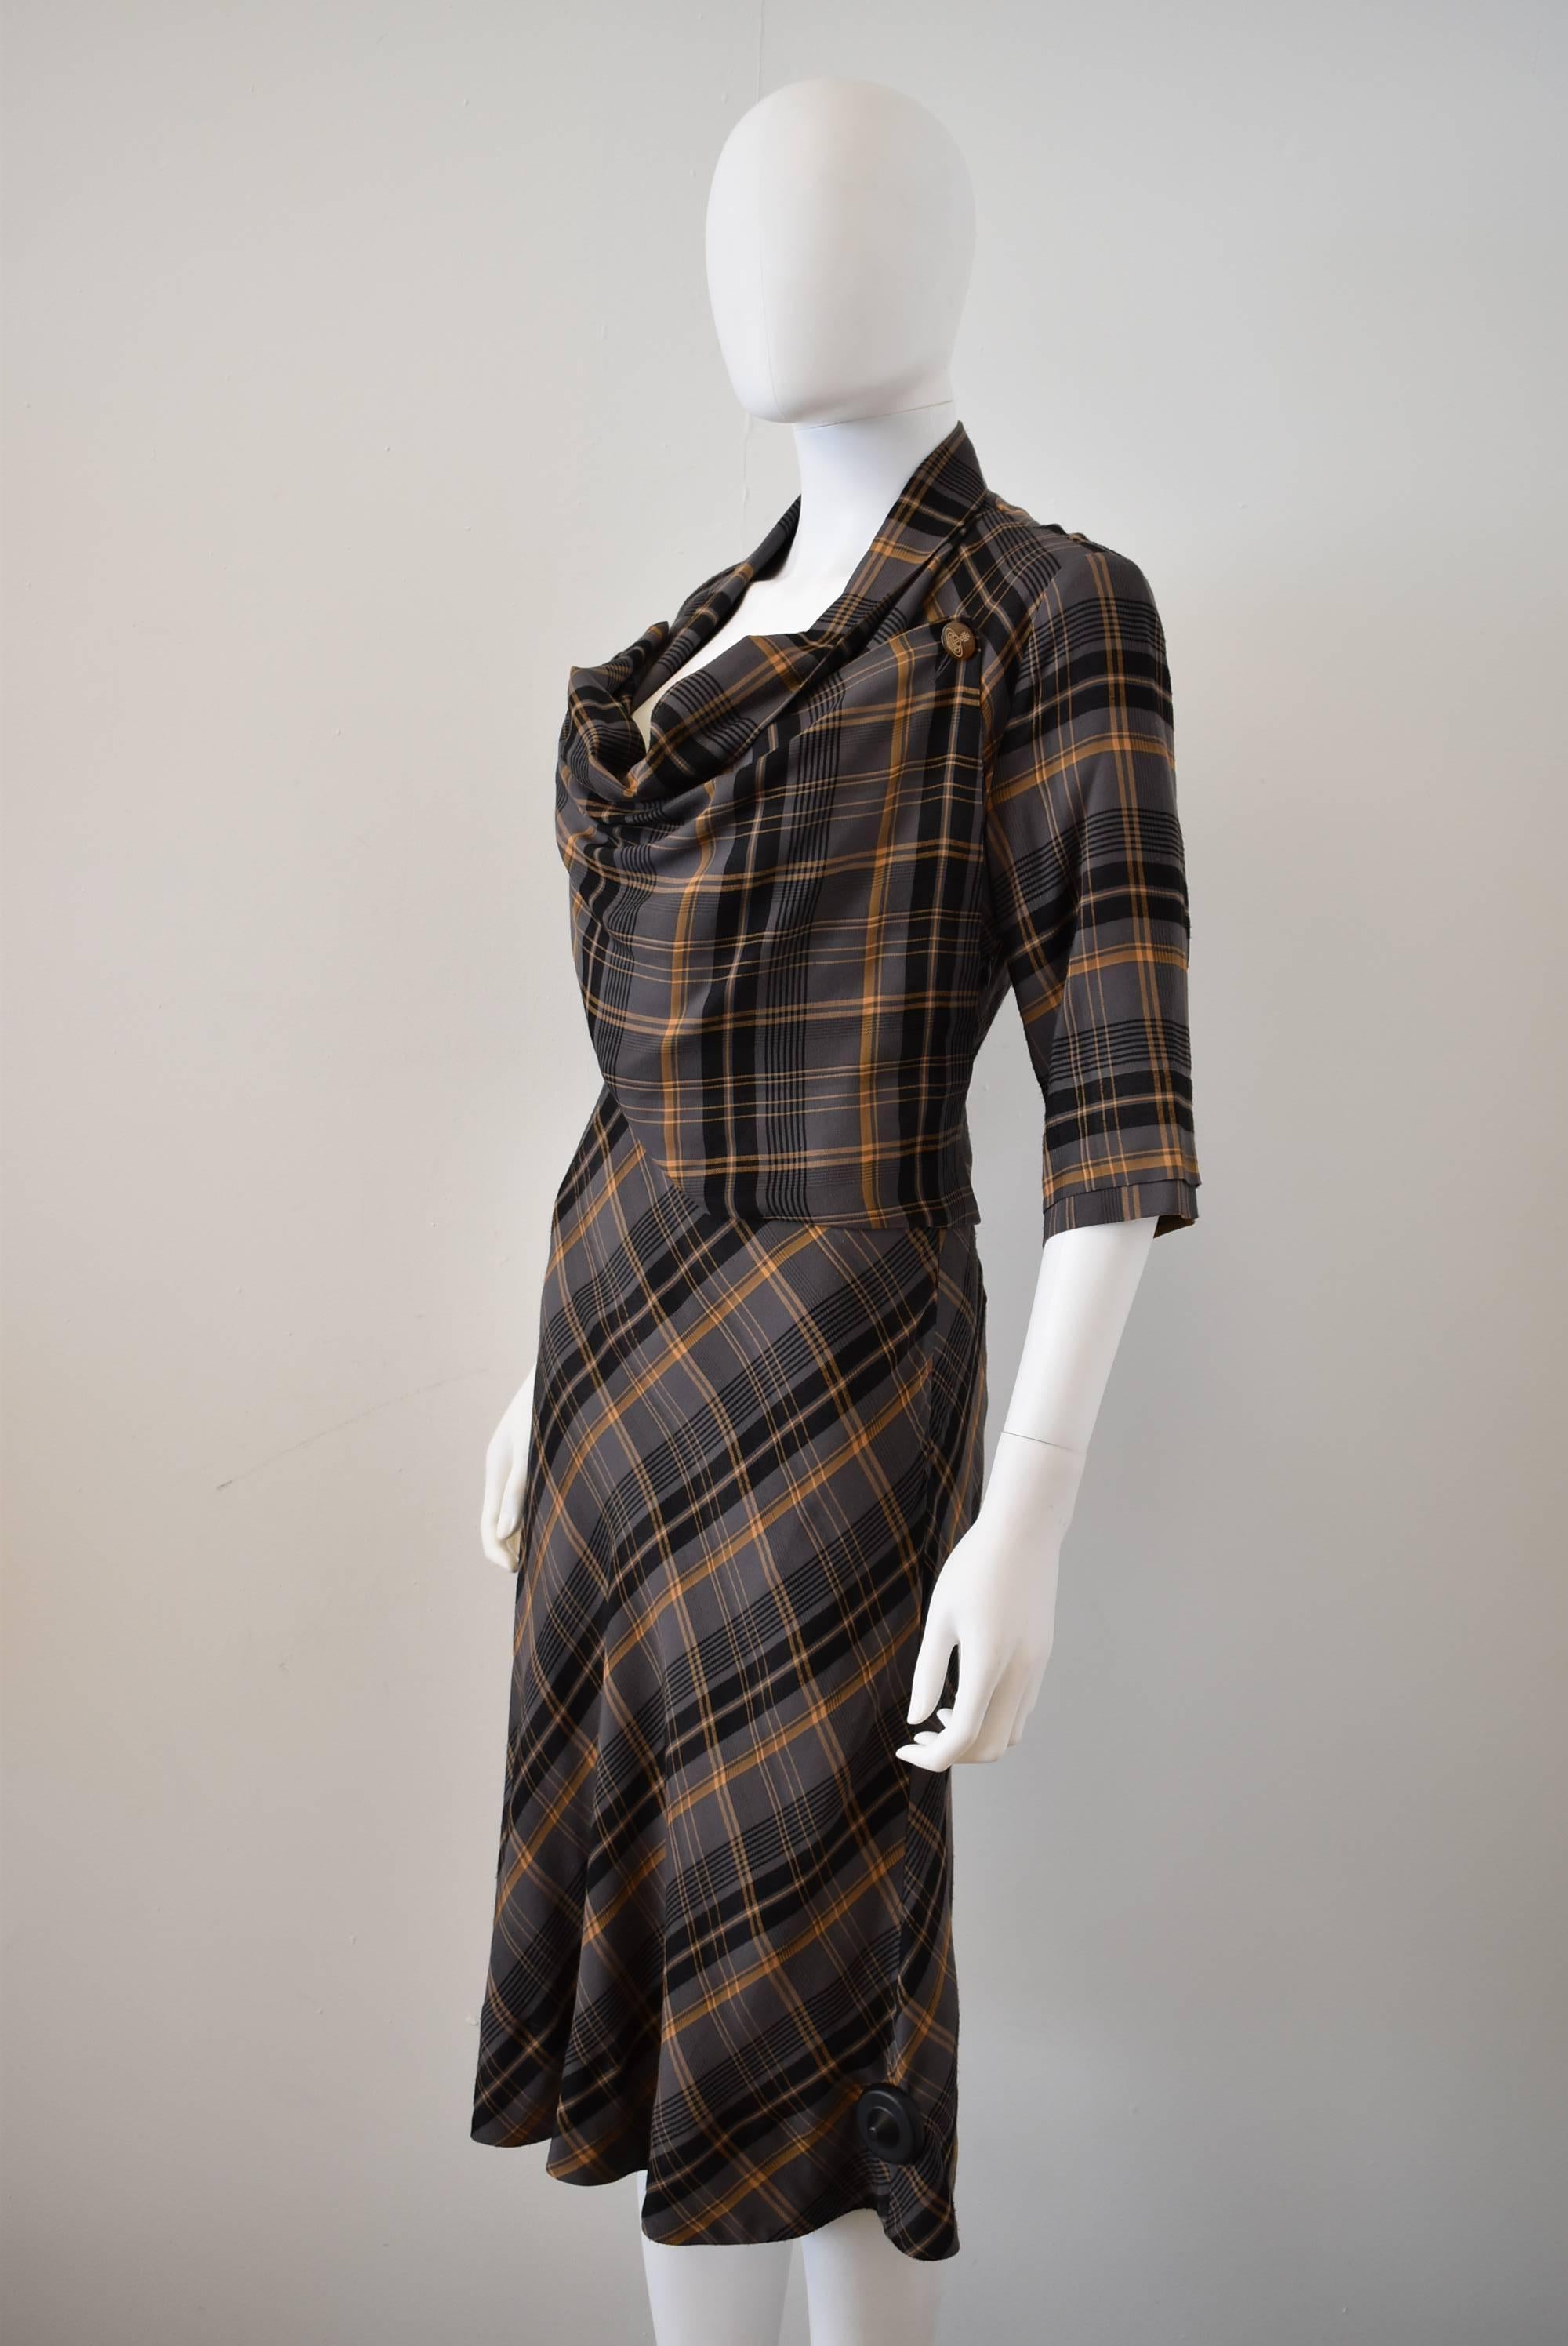 Vivienne Westwood Red Label Grey Tartan Check Dress with Cowl Neck Bib Front For Sale 1